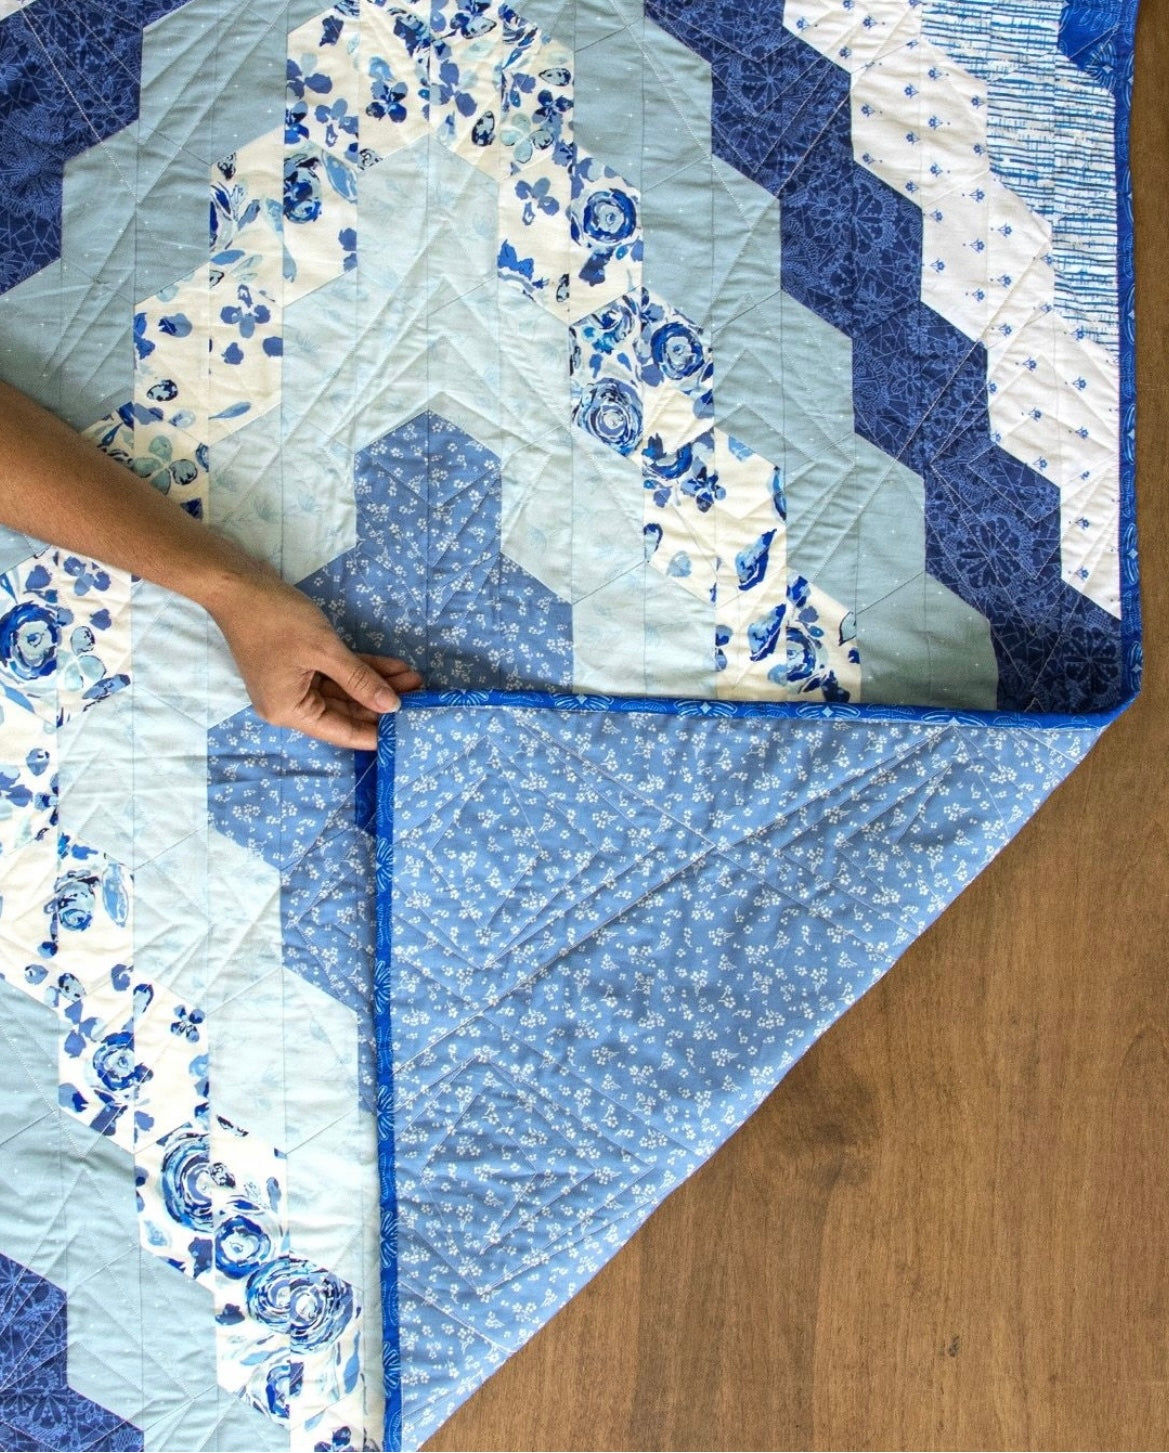 Chinoiserie Quilt Kit - Pattern by Art Gallery Fabrics